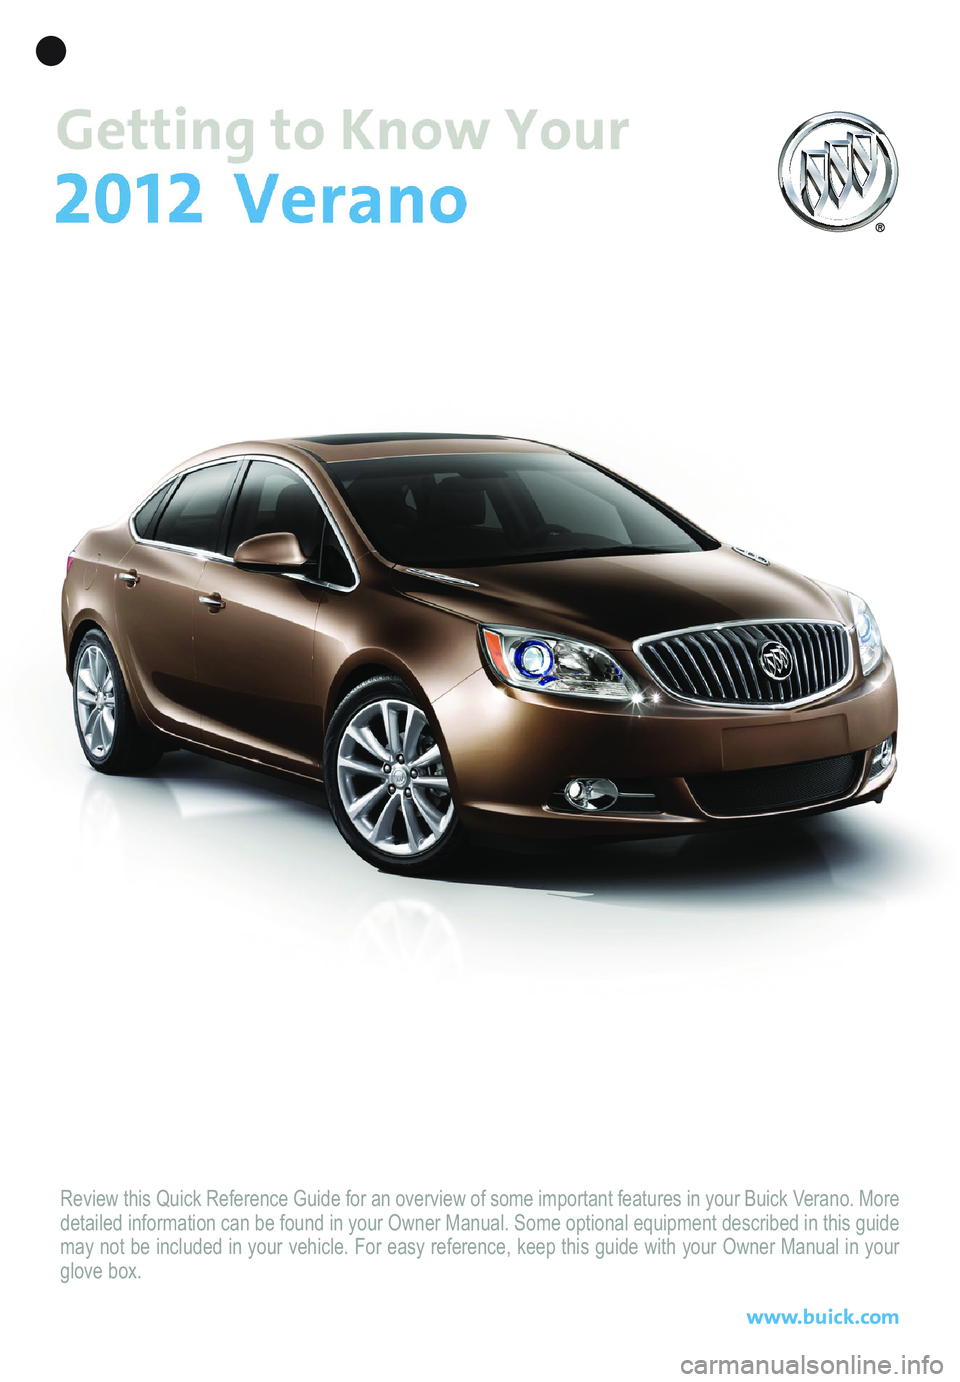 BUICK VERANO 2012  Get To Know Guide Review this Quick Reference Guide for an overview of some important features in your Buick Verano. More
detailed information can be found in your Owner Manual. Some optional equipment described in thi